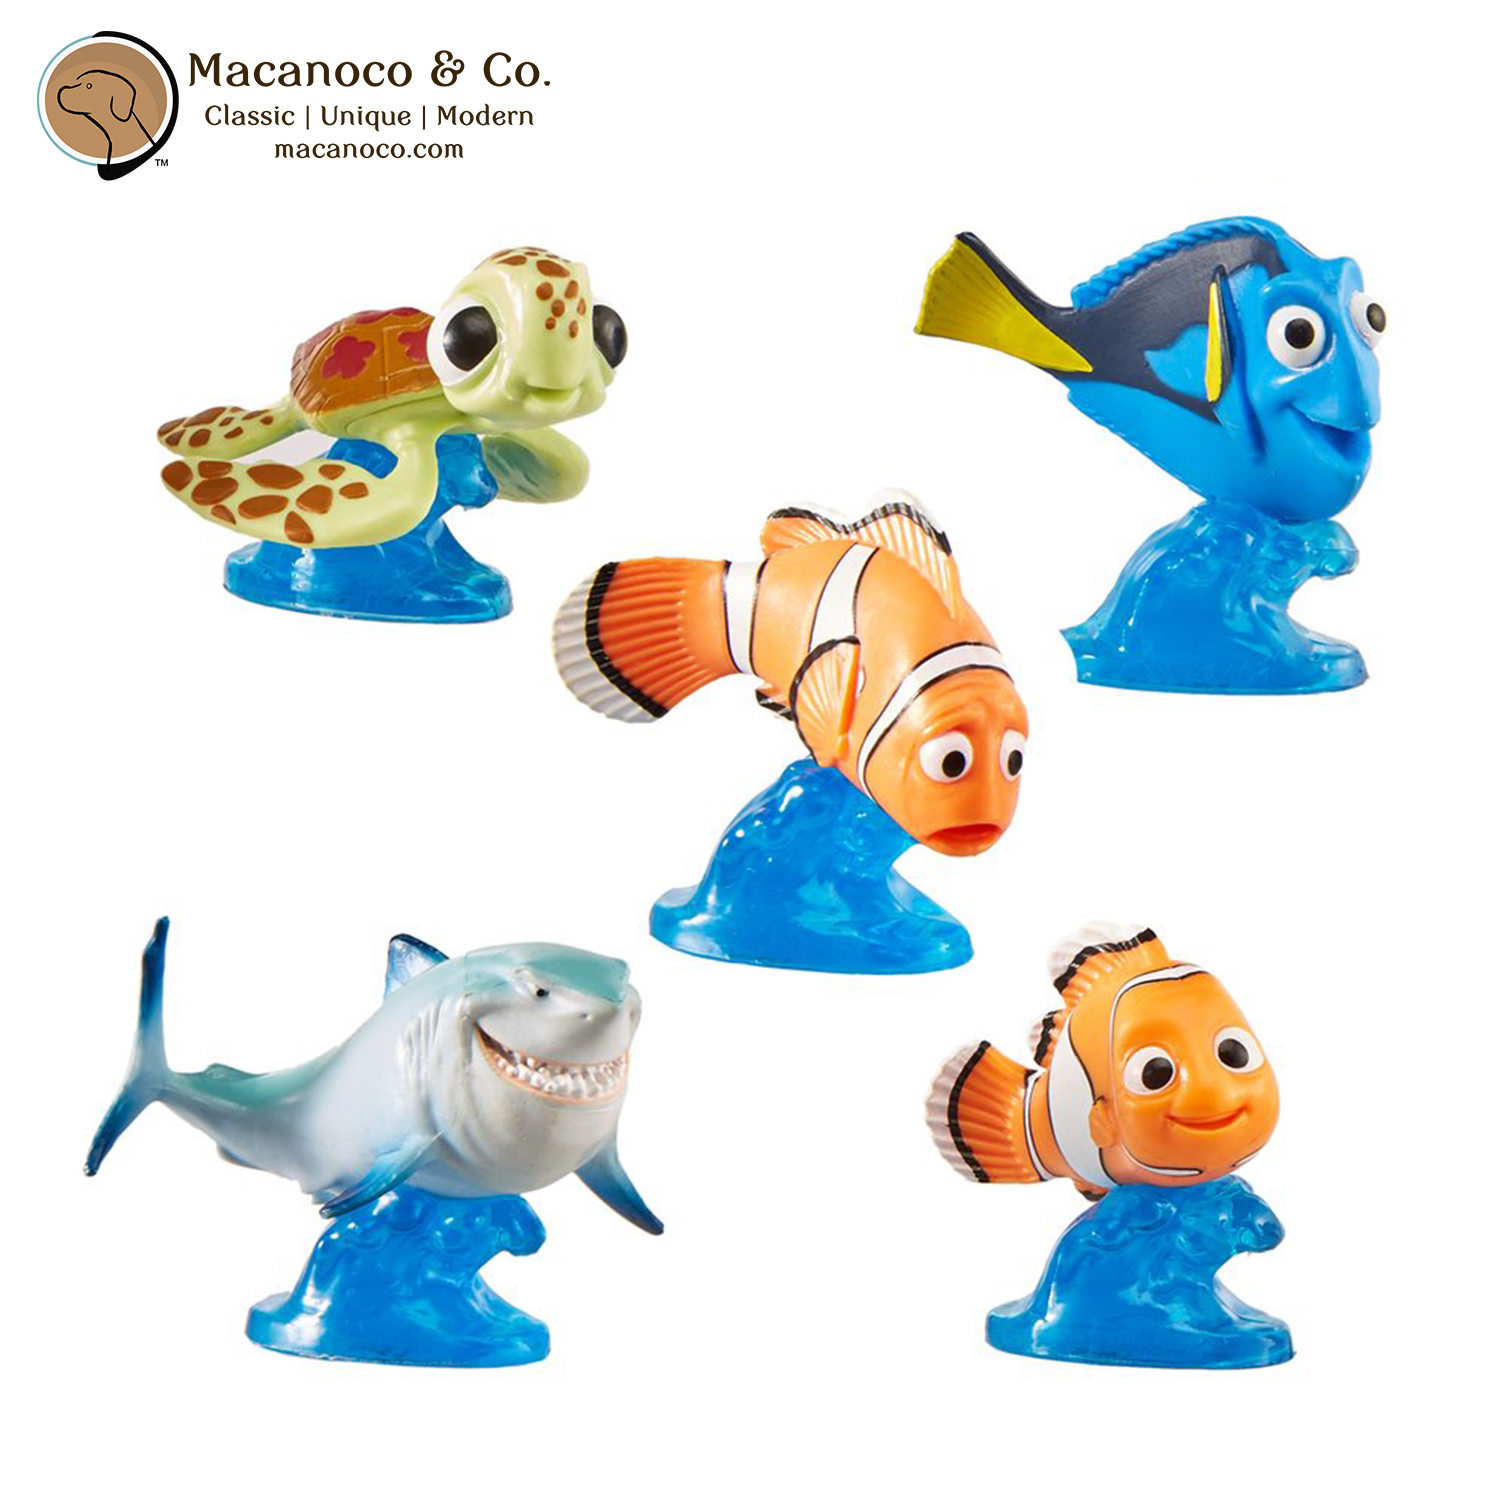 Thinkway Toys Disney Pixar Finding Nemo Movie Series 2 1 2 Inch Long Poseable Action Figure